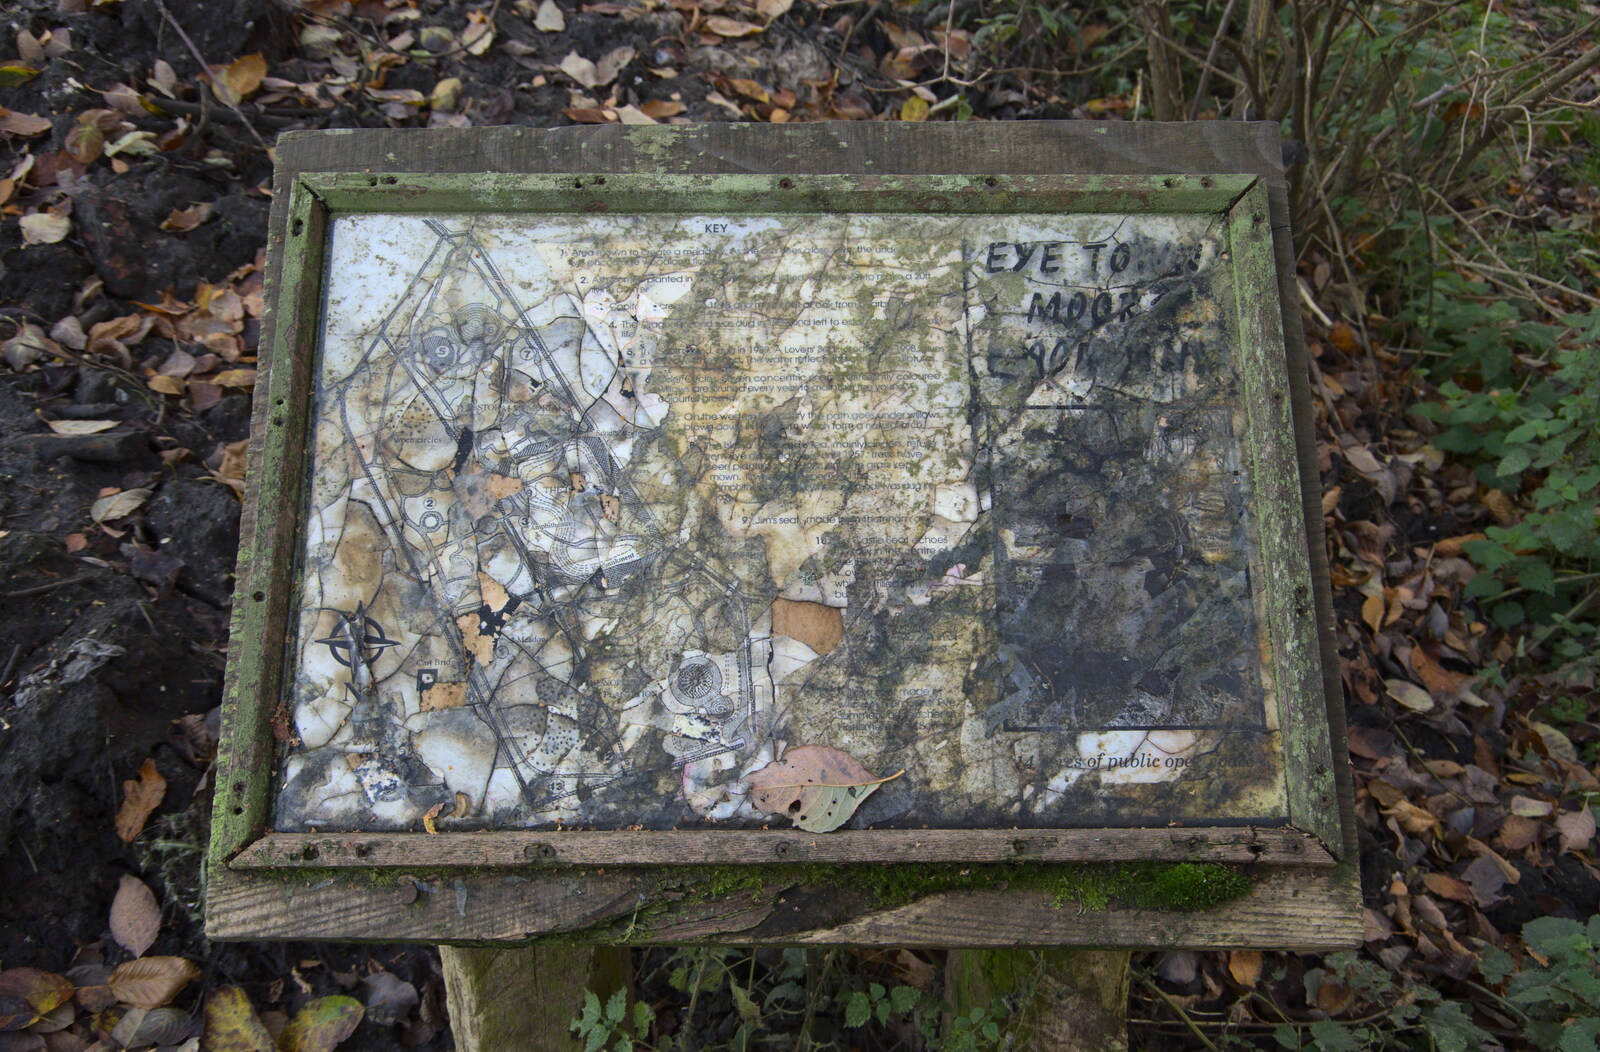 The sign for the Town Moors has seen better days from The Dereliction of Eye, Suffolk - 22nd November 2020